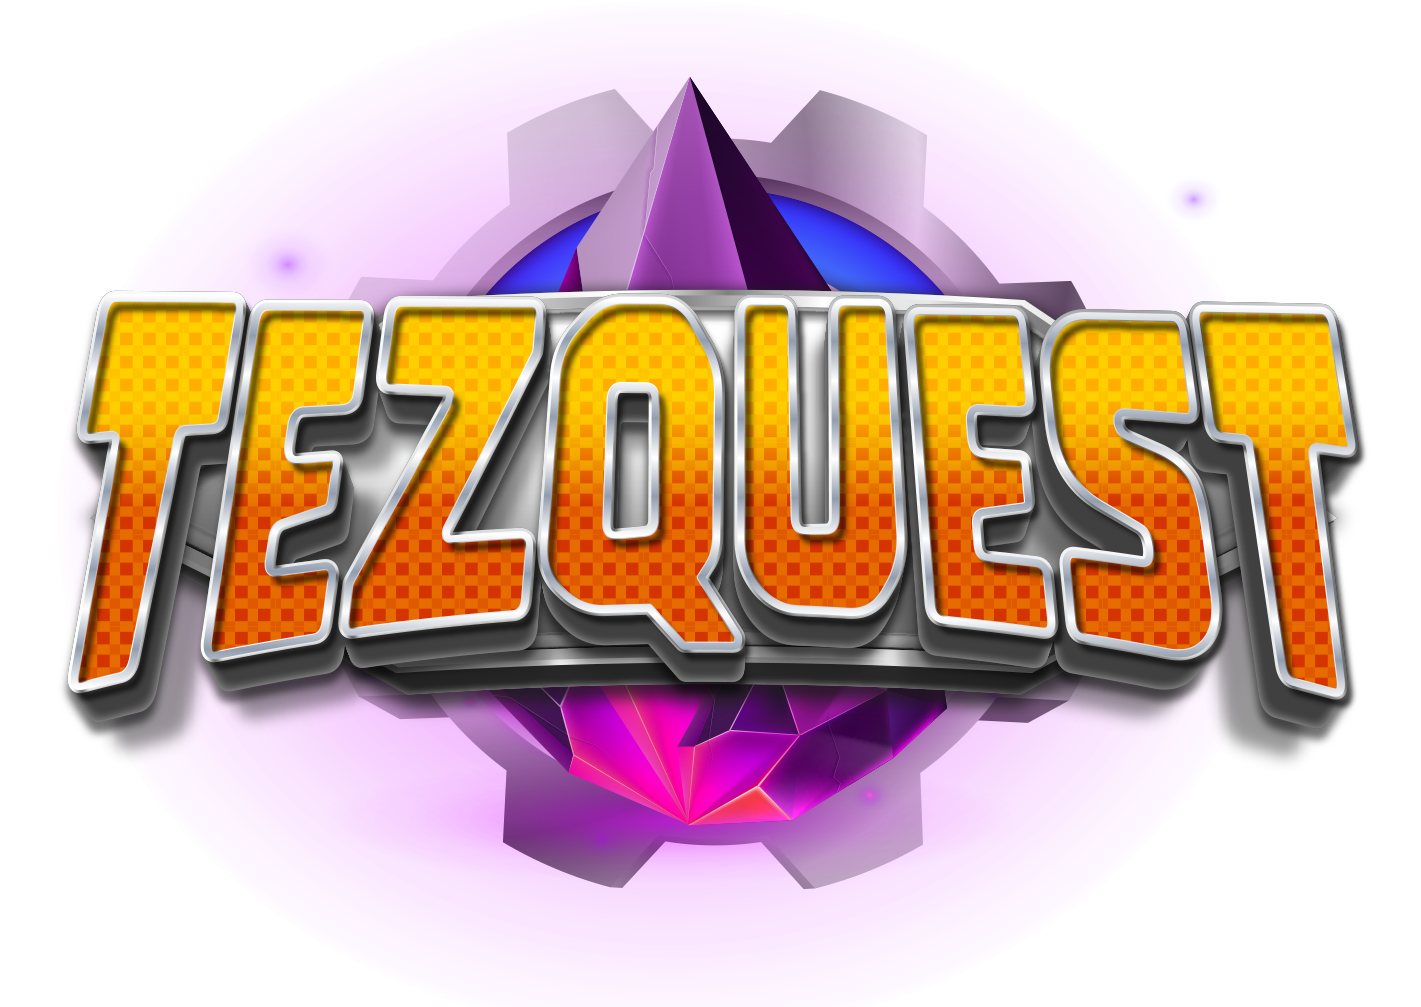 Play TezQuest @ Tezzers.com!